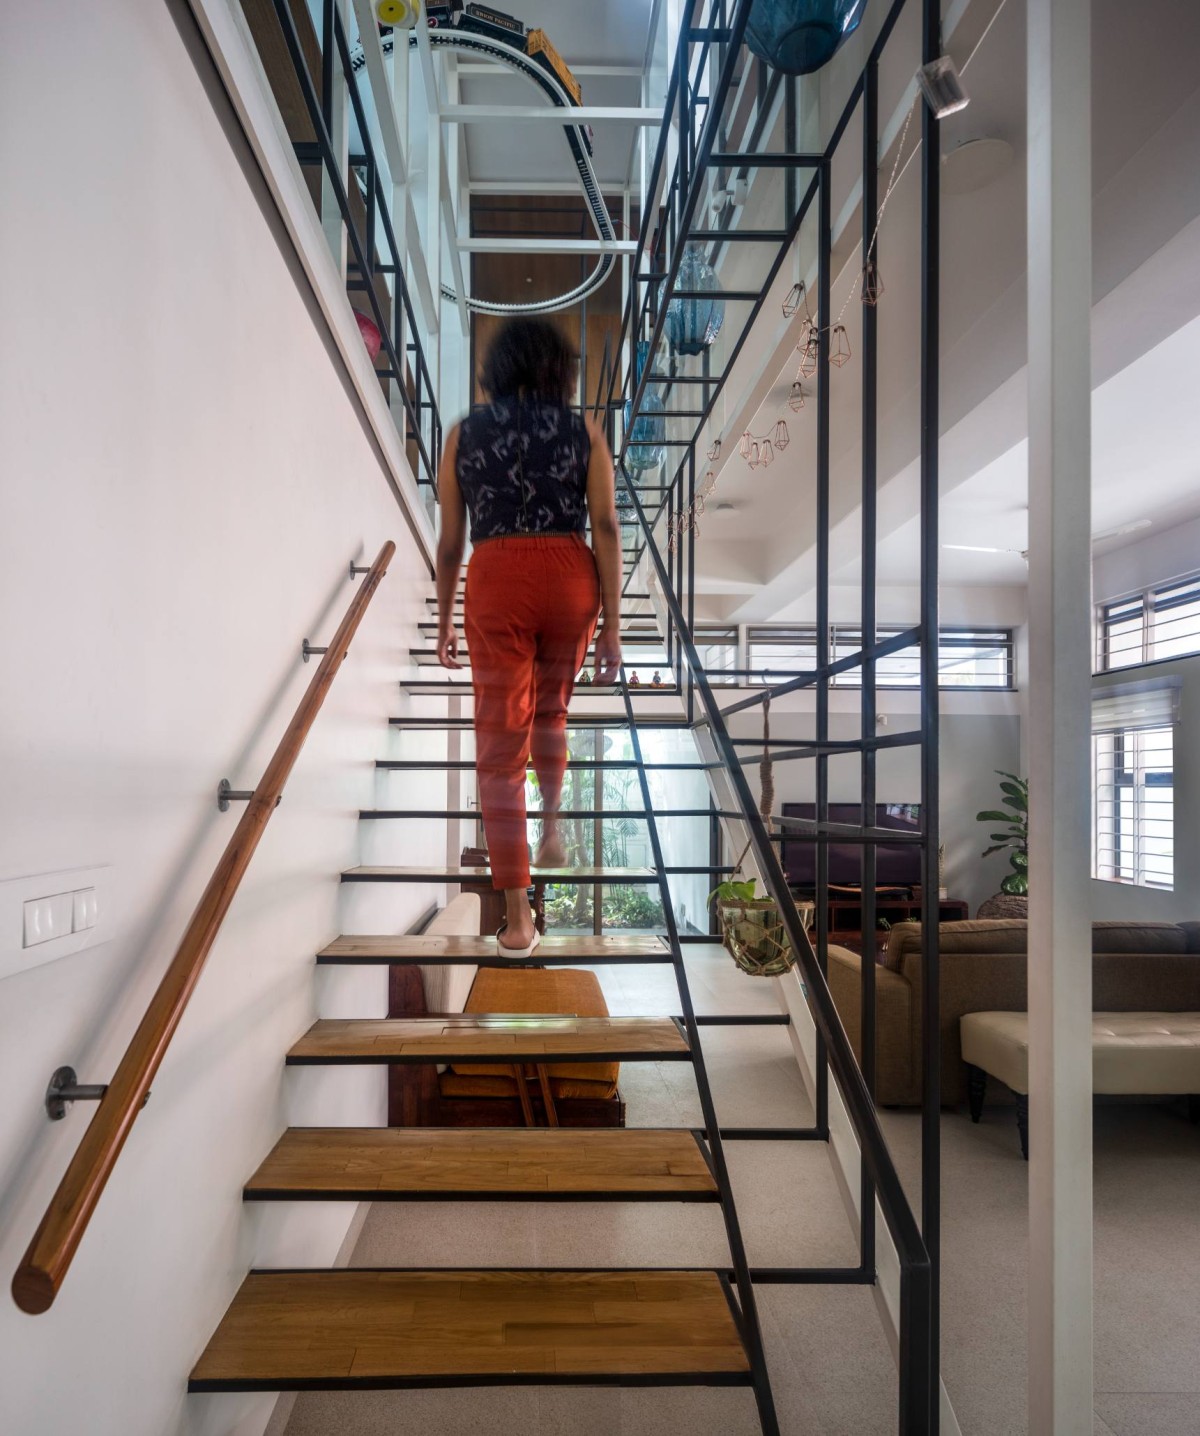 Climbing up the stairs to the Mezzanine of Aadyam by Gaurav Roy Choudhury Architects